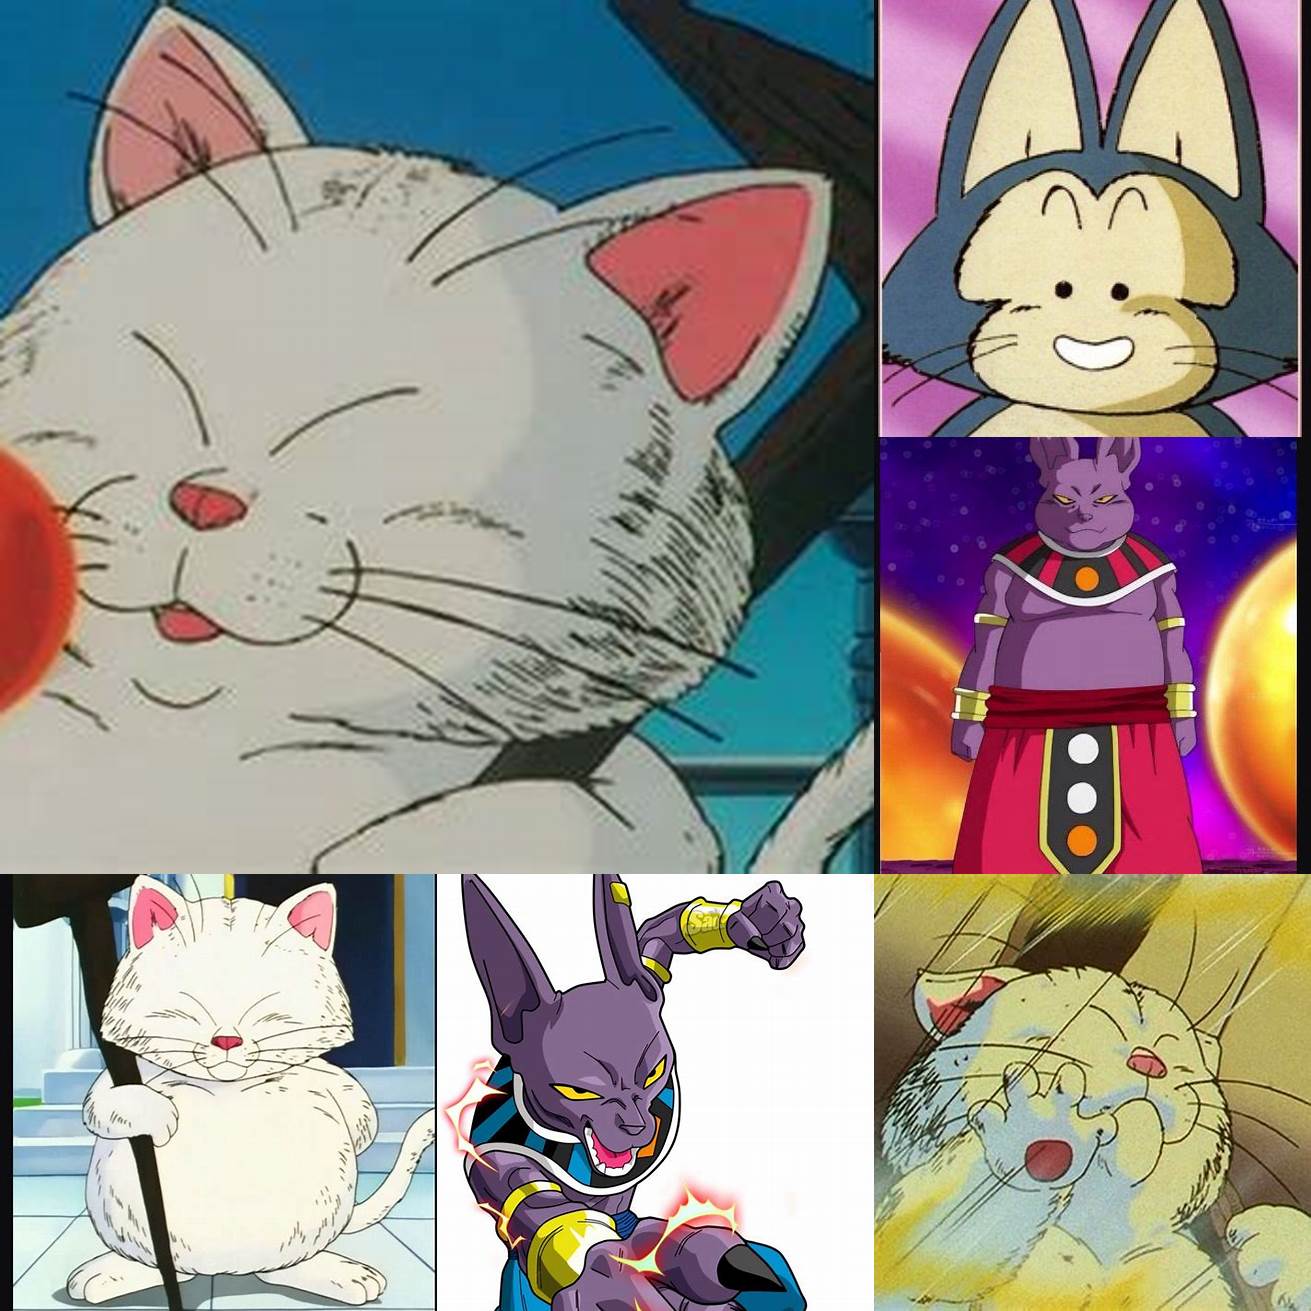 What is the Cat Dragon Ball Zs relationship with Goku